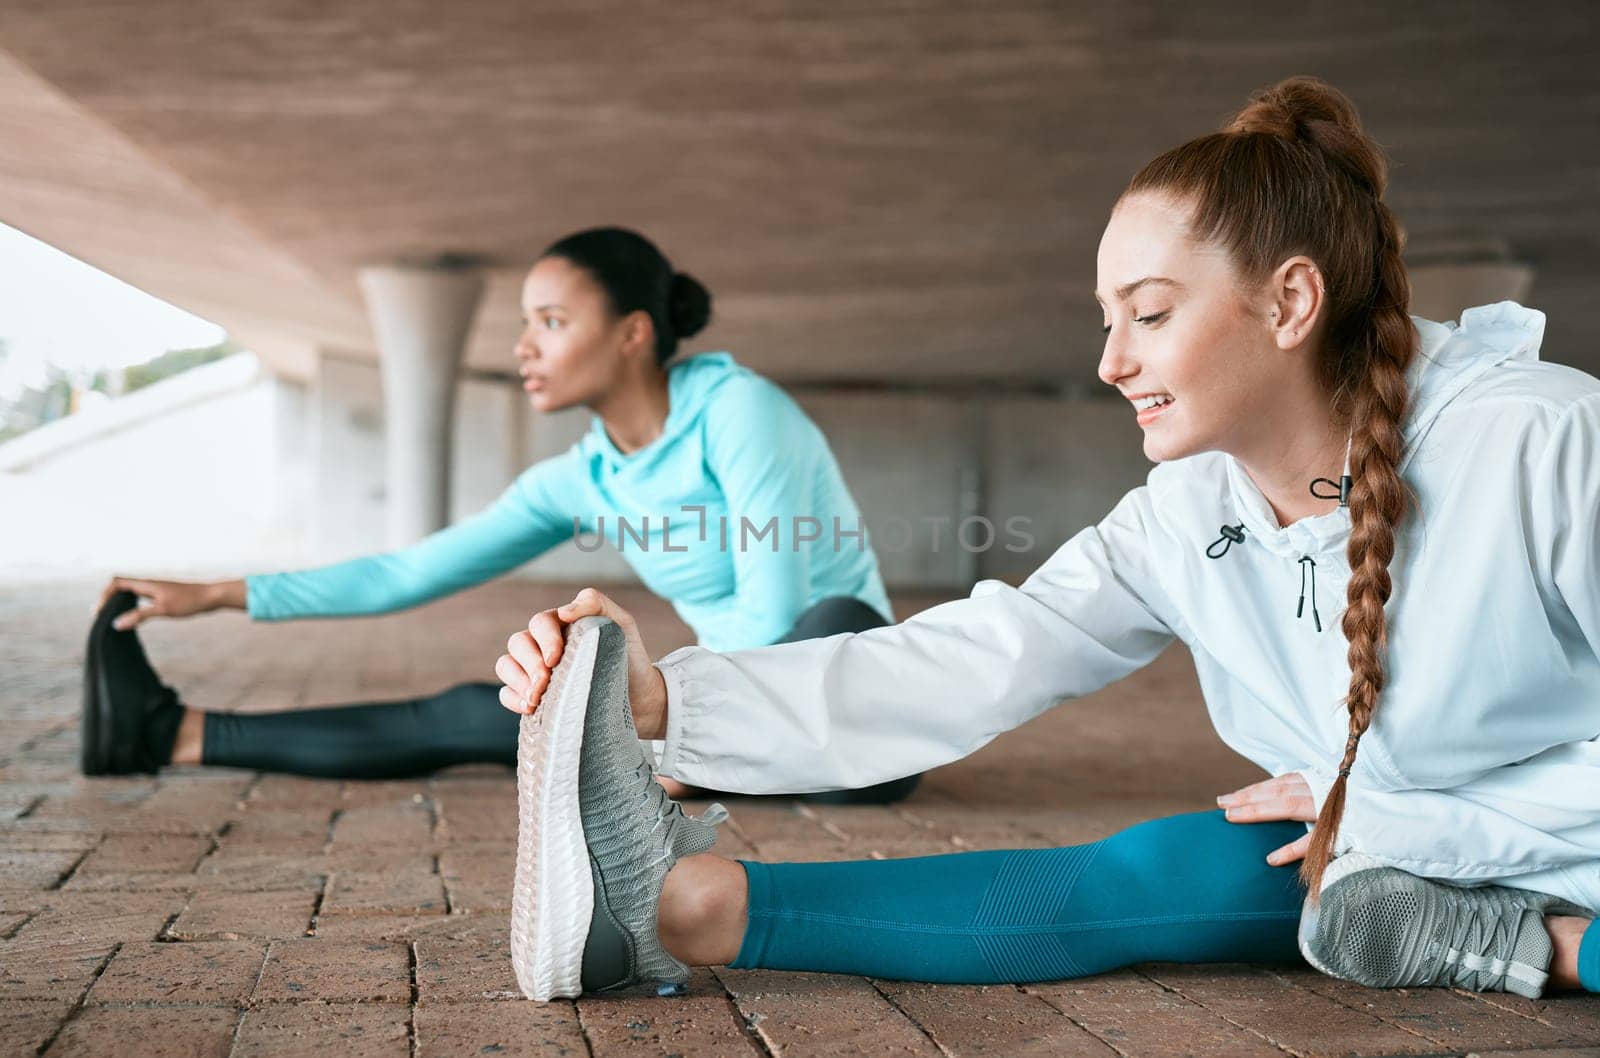 Friends, workout and people stretching as a fitness club for sports, health and wellness in an urban town together. Sport, commitment and friends training or team leg warm up for workout or run.